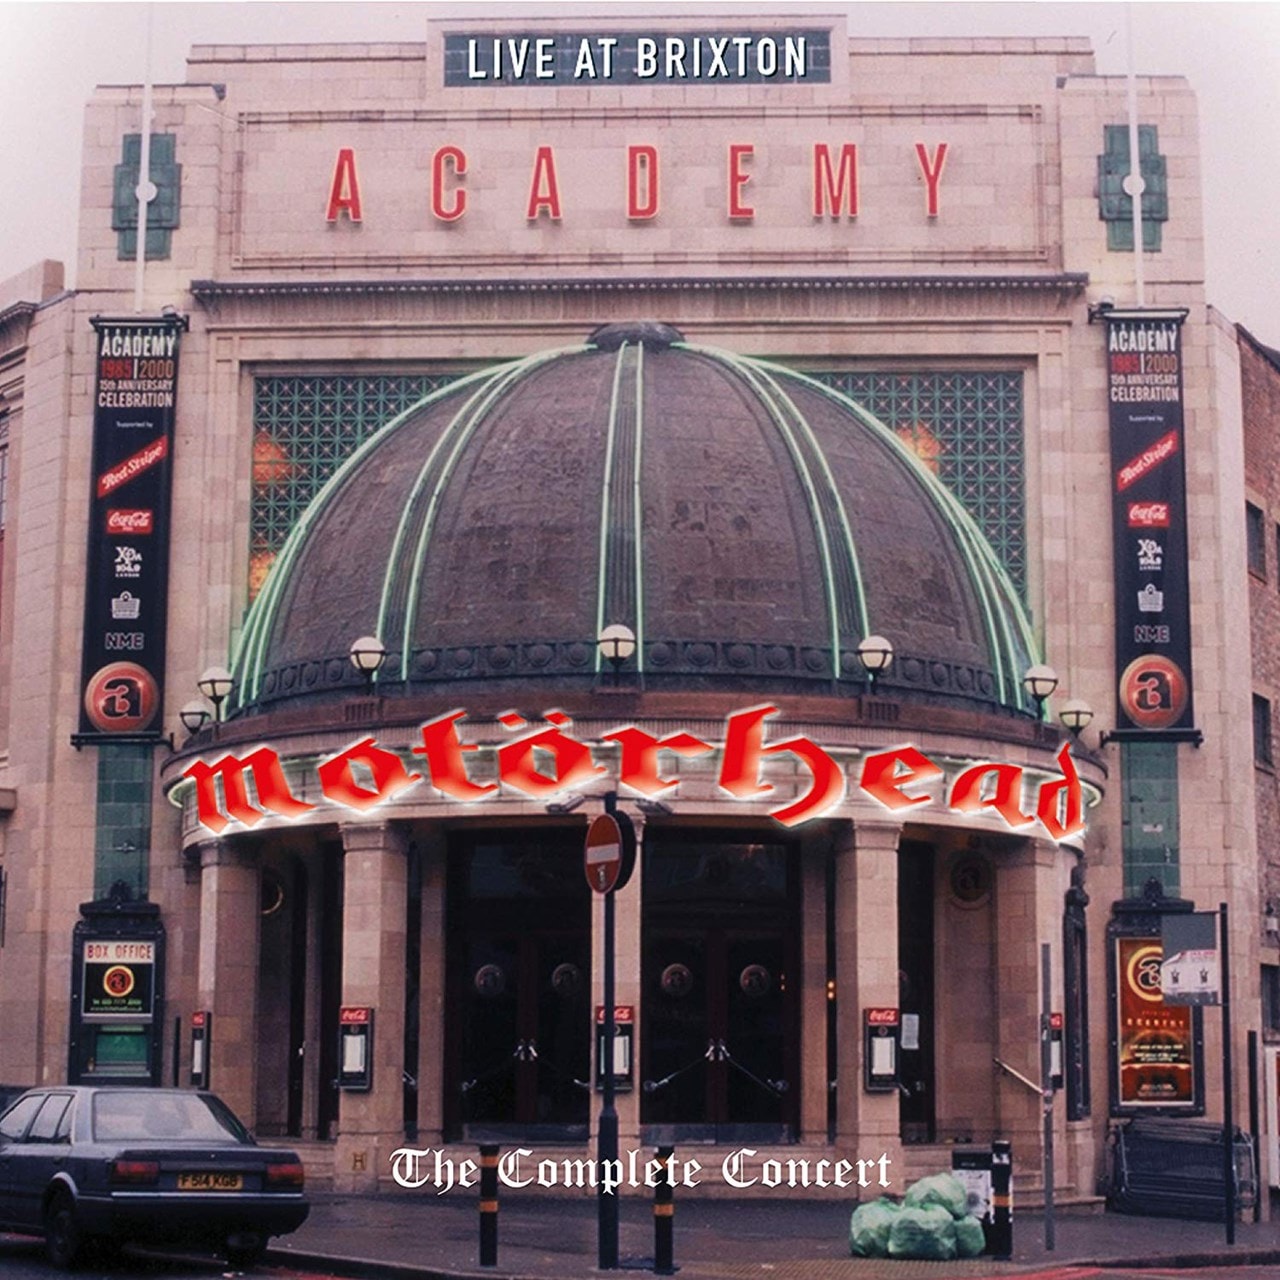 Live at Brixton Academy CD Album Free shipping over £20 HMV Store